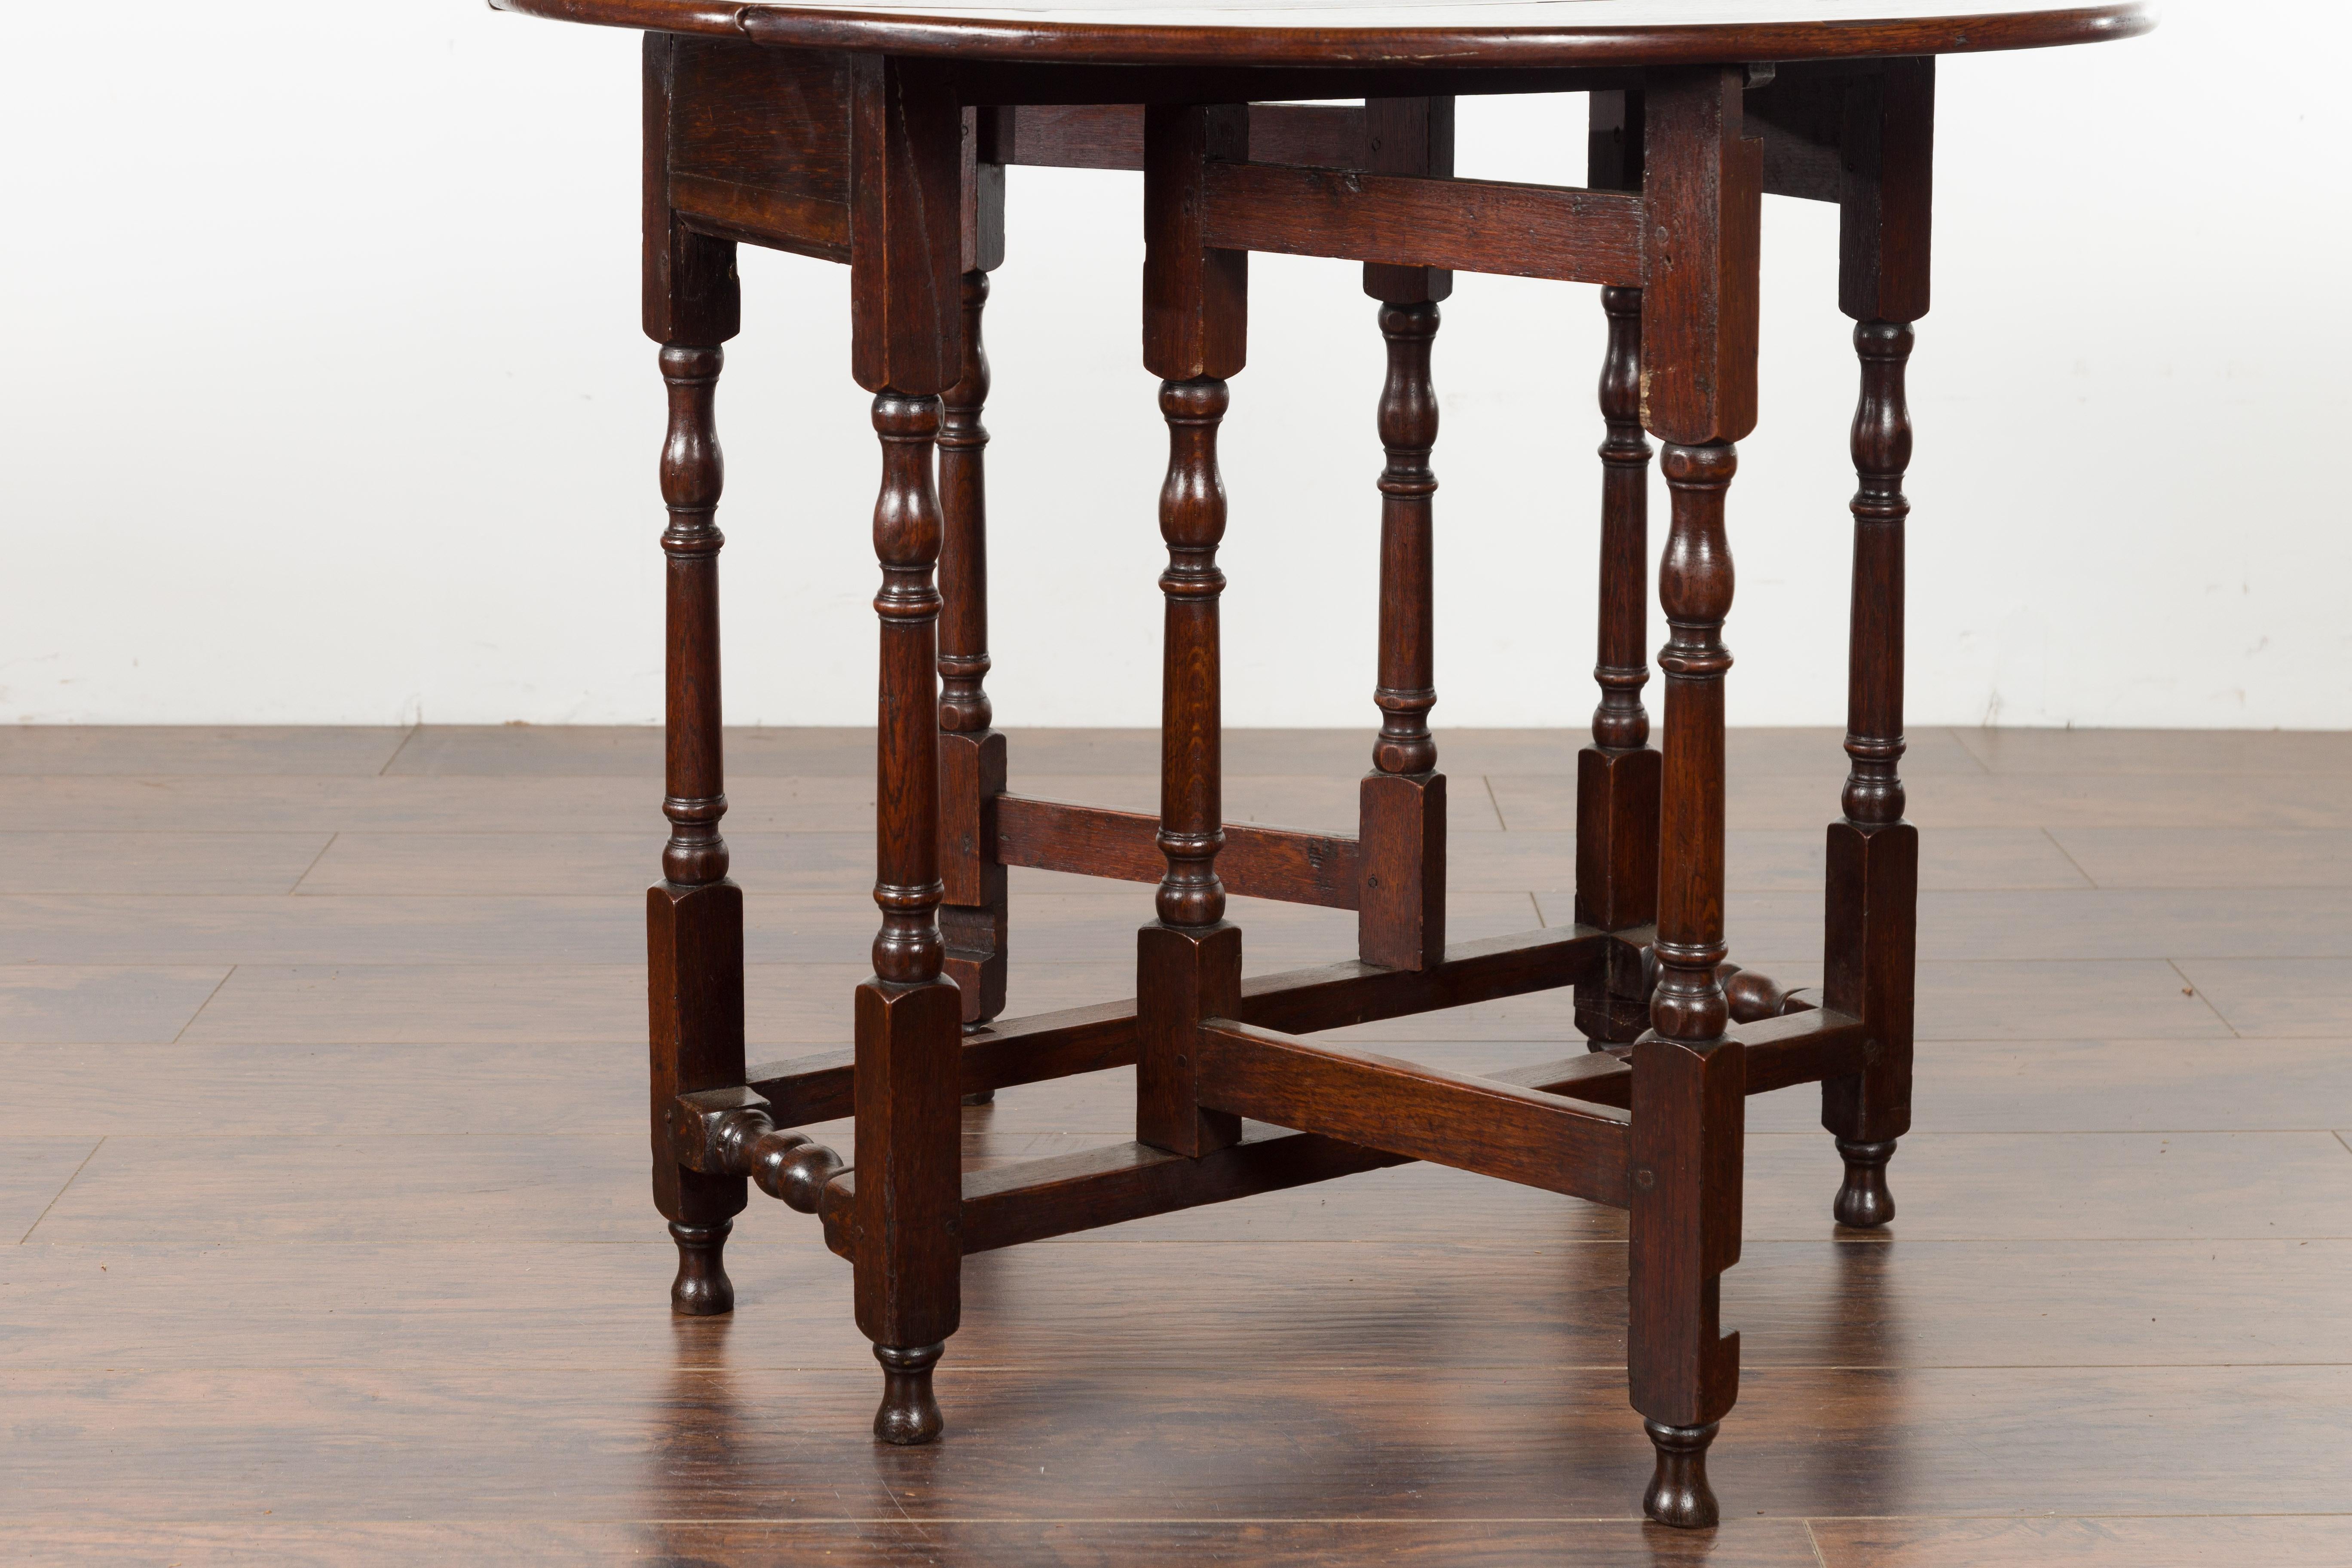 Petite English Oval Oak 19th Century Drop-Leaf Table with Baluster Legs For Sale 6